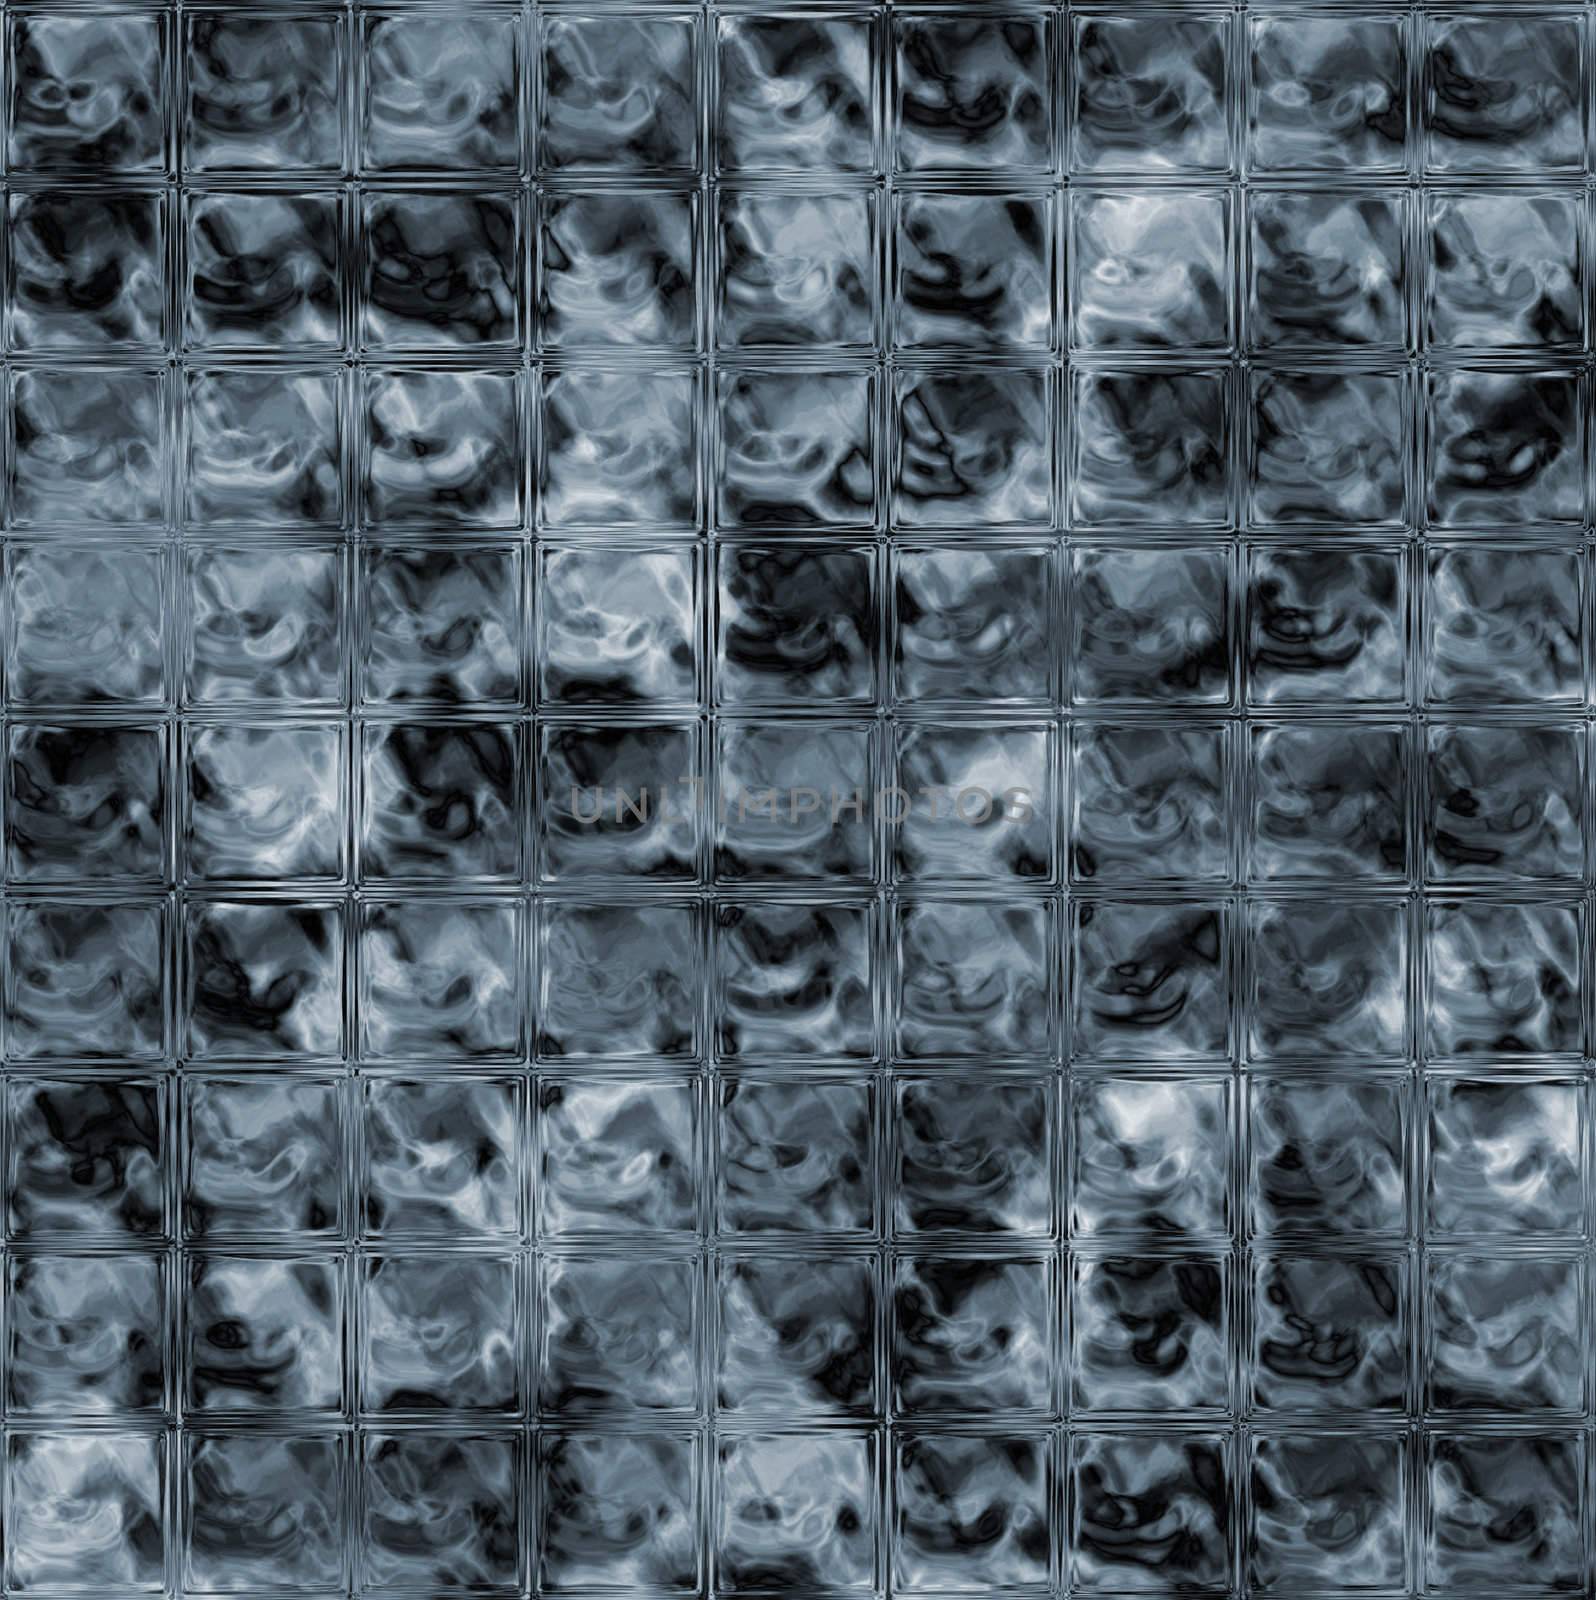 Background image of a glass block pattern.